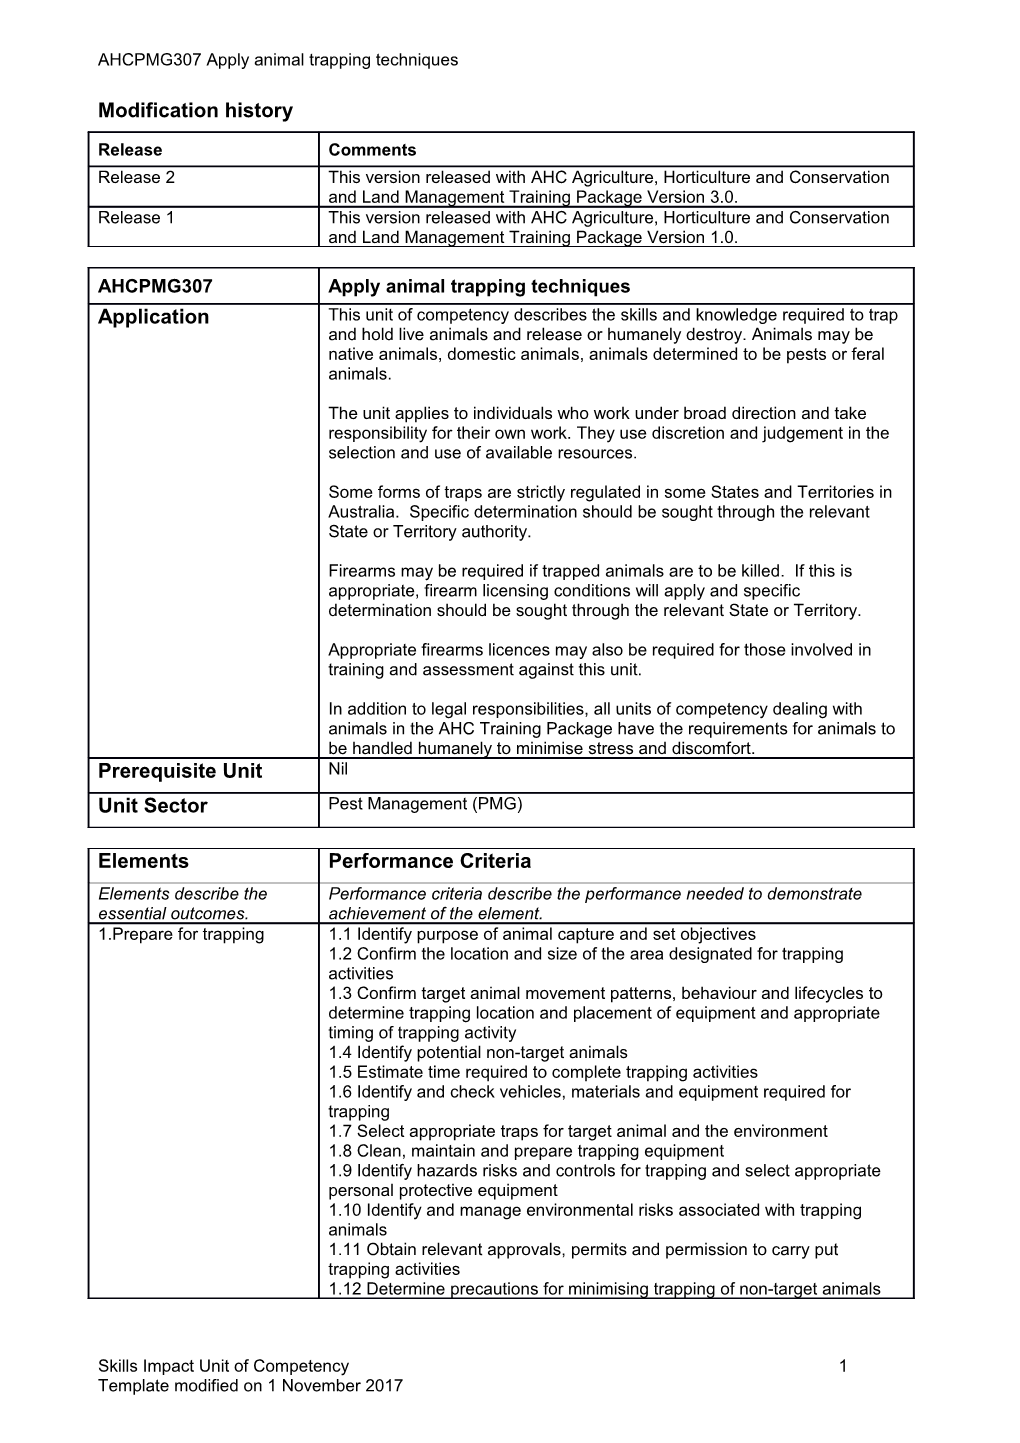 Skills Impact Unit of Competency Template s4